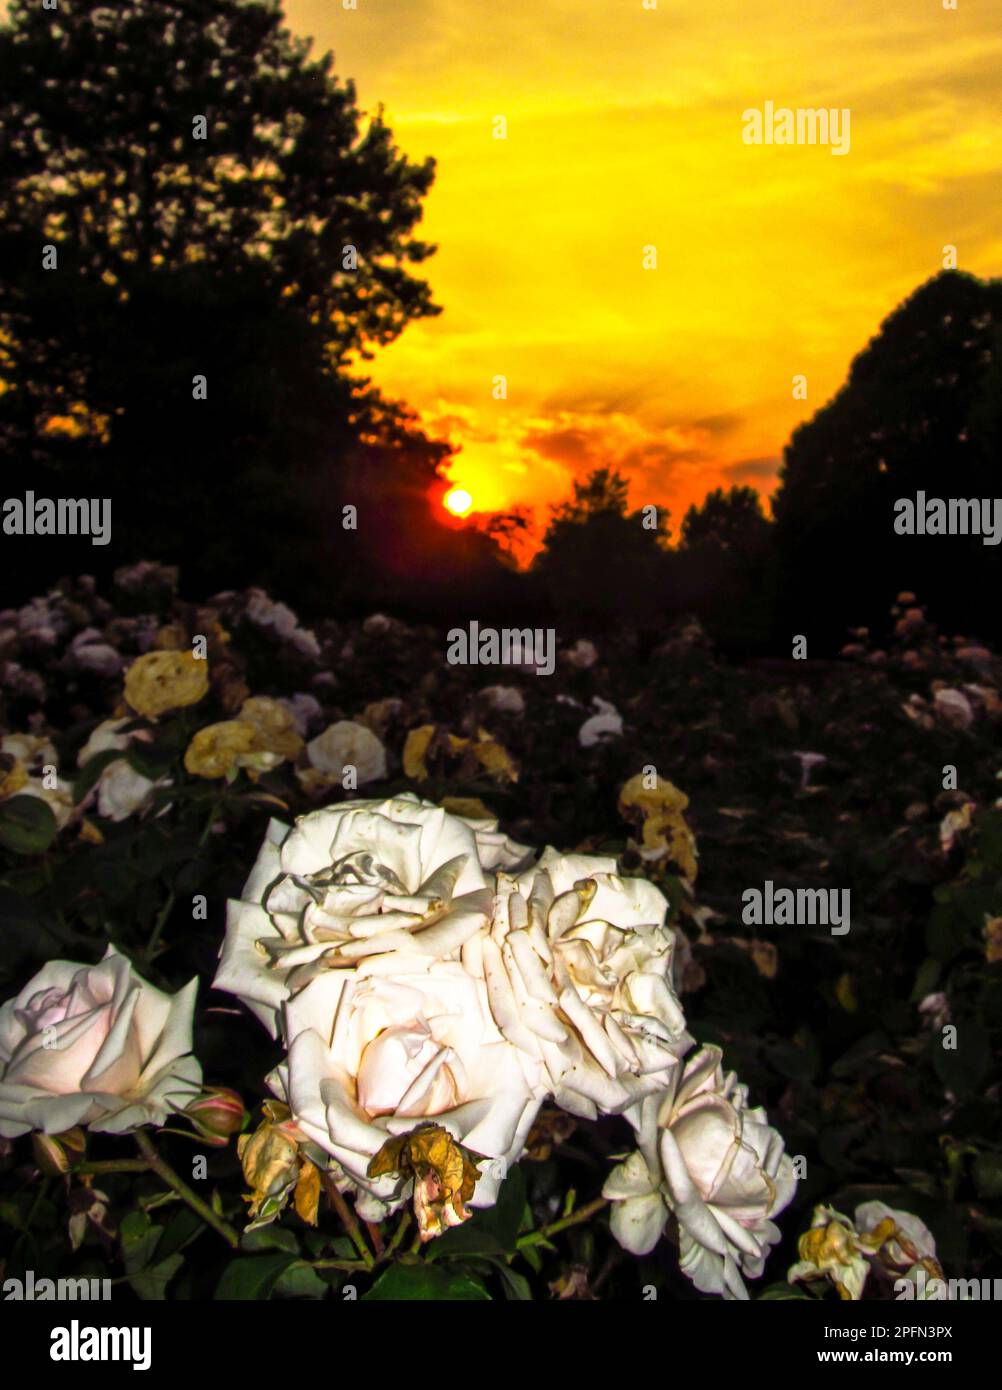 A golden sunset, with a mass of white roses in the foreground. Stock Photo